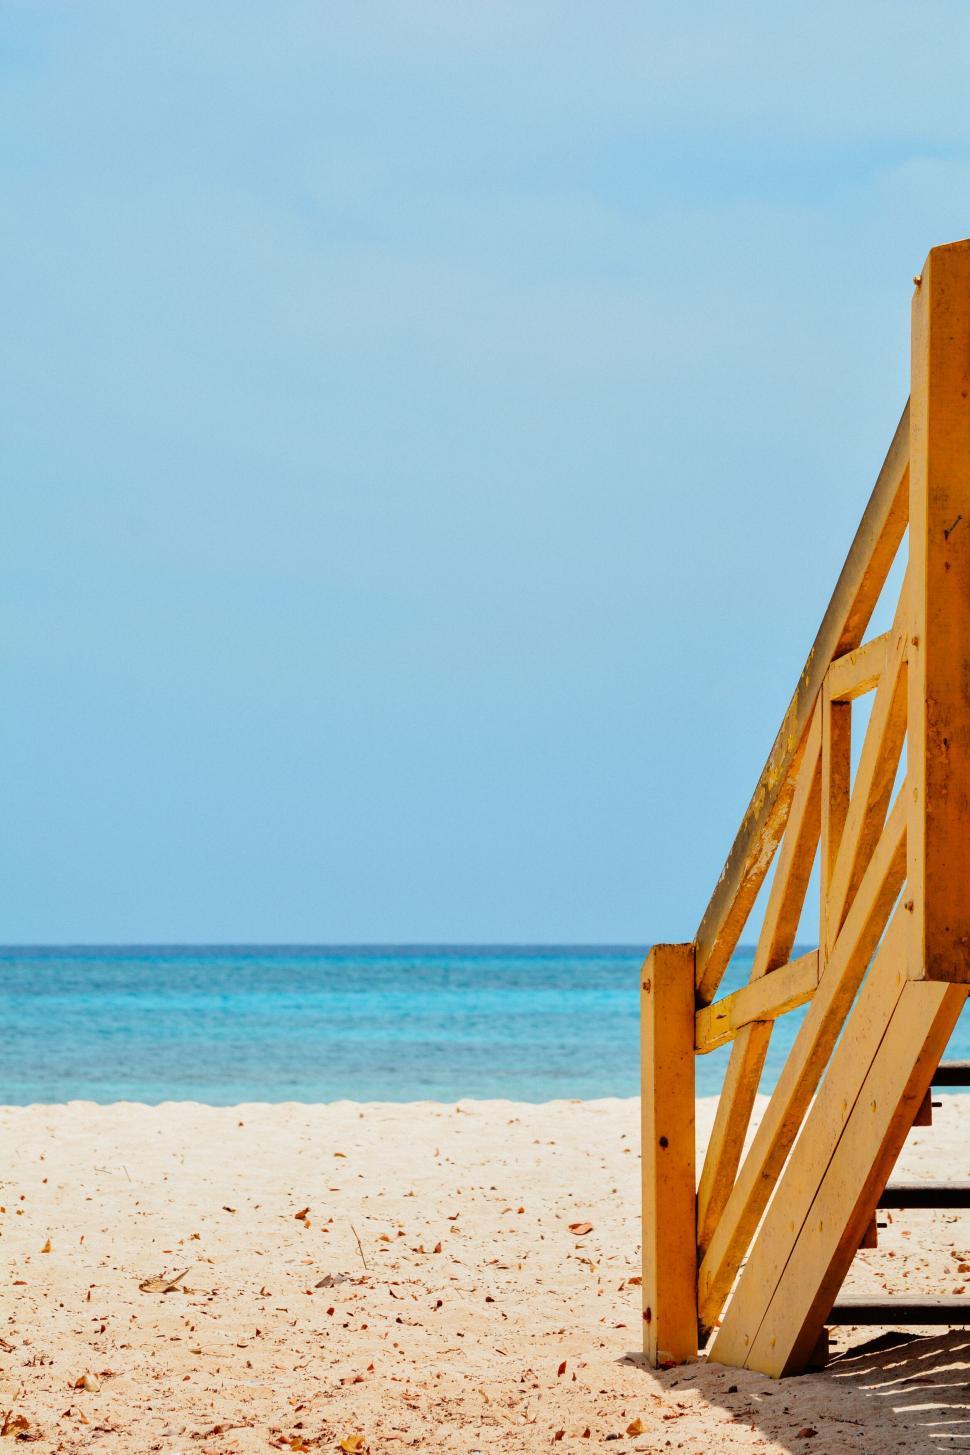 Free Image of Tropical beach with wooden lifeguard tower 